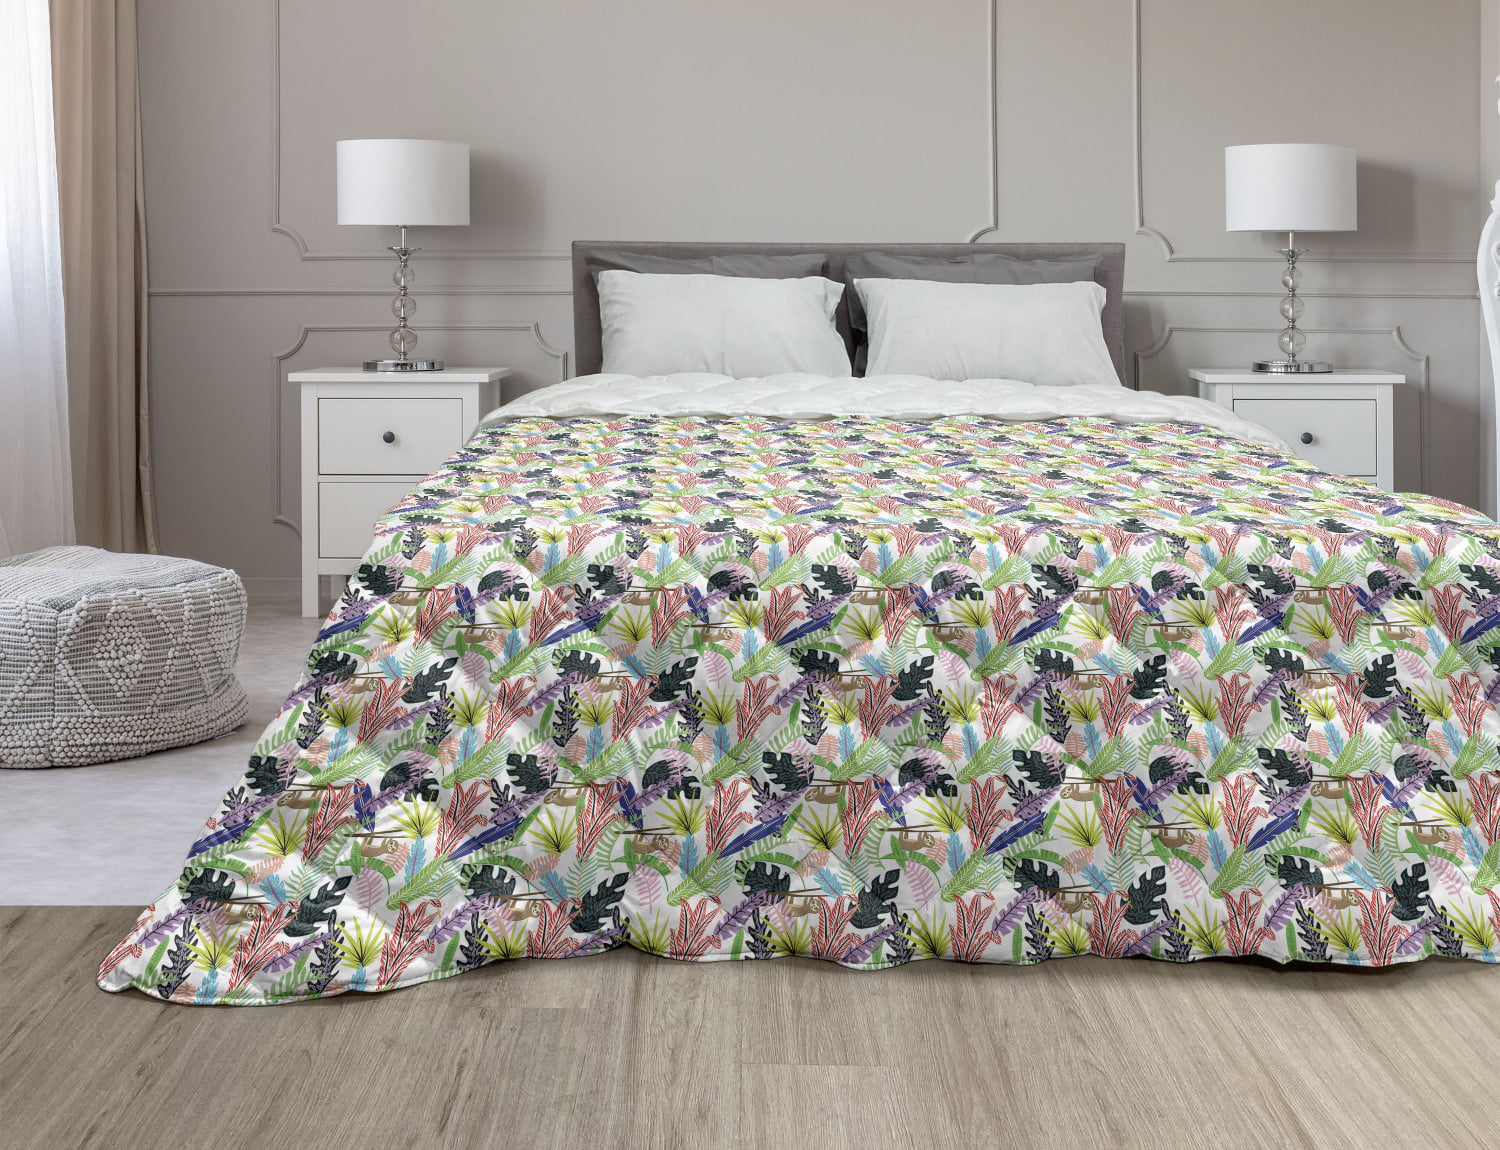 Details about   Tropical Palm Trees & Hawaiian Hibiscus Beach Twin Comforter Set 6Pc Bed In Bag 